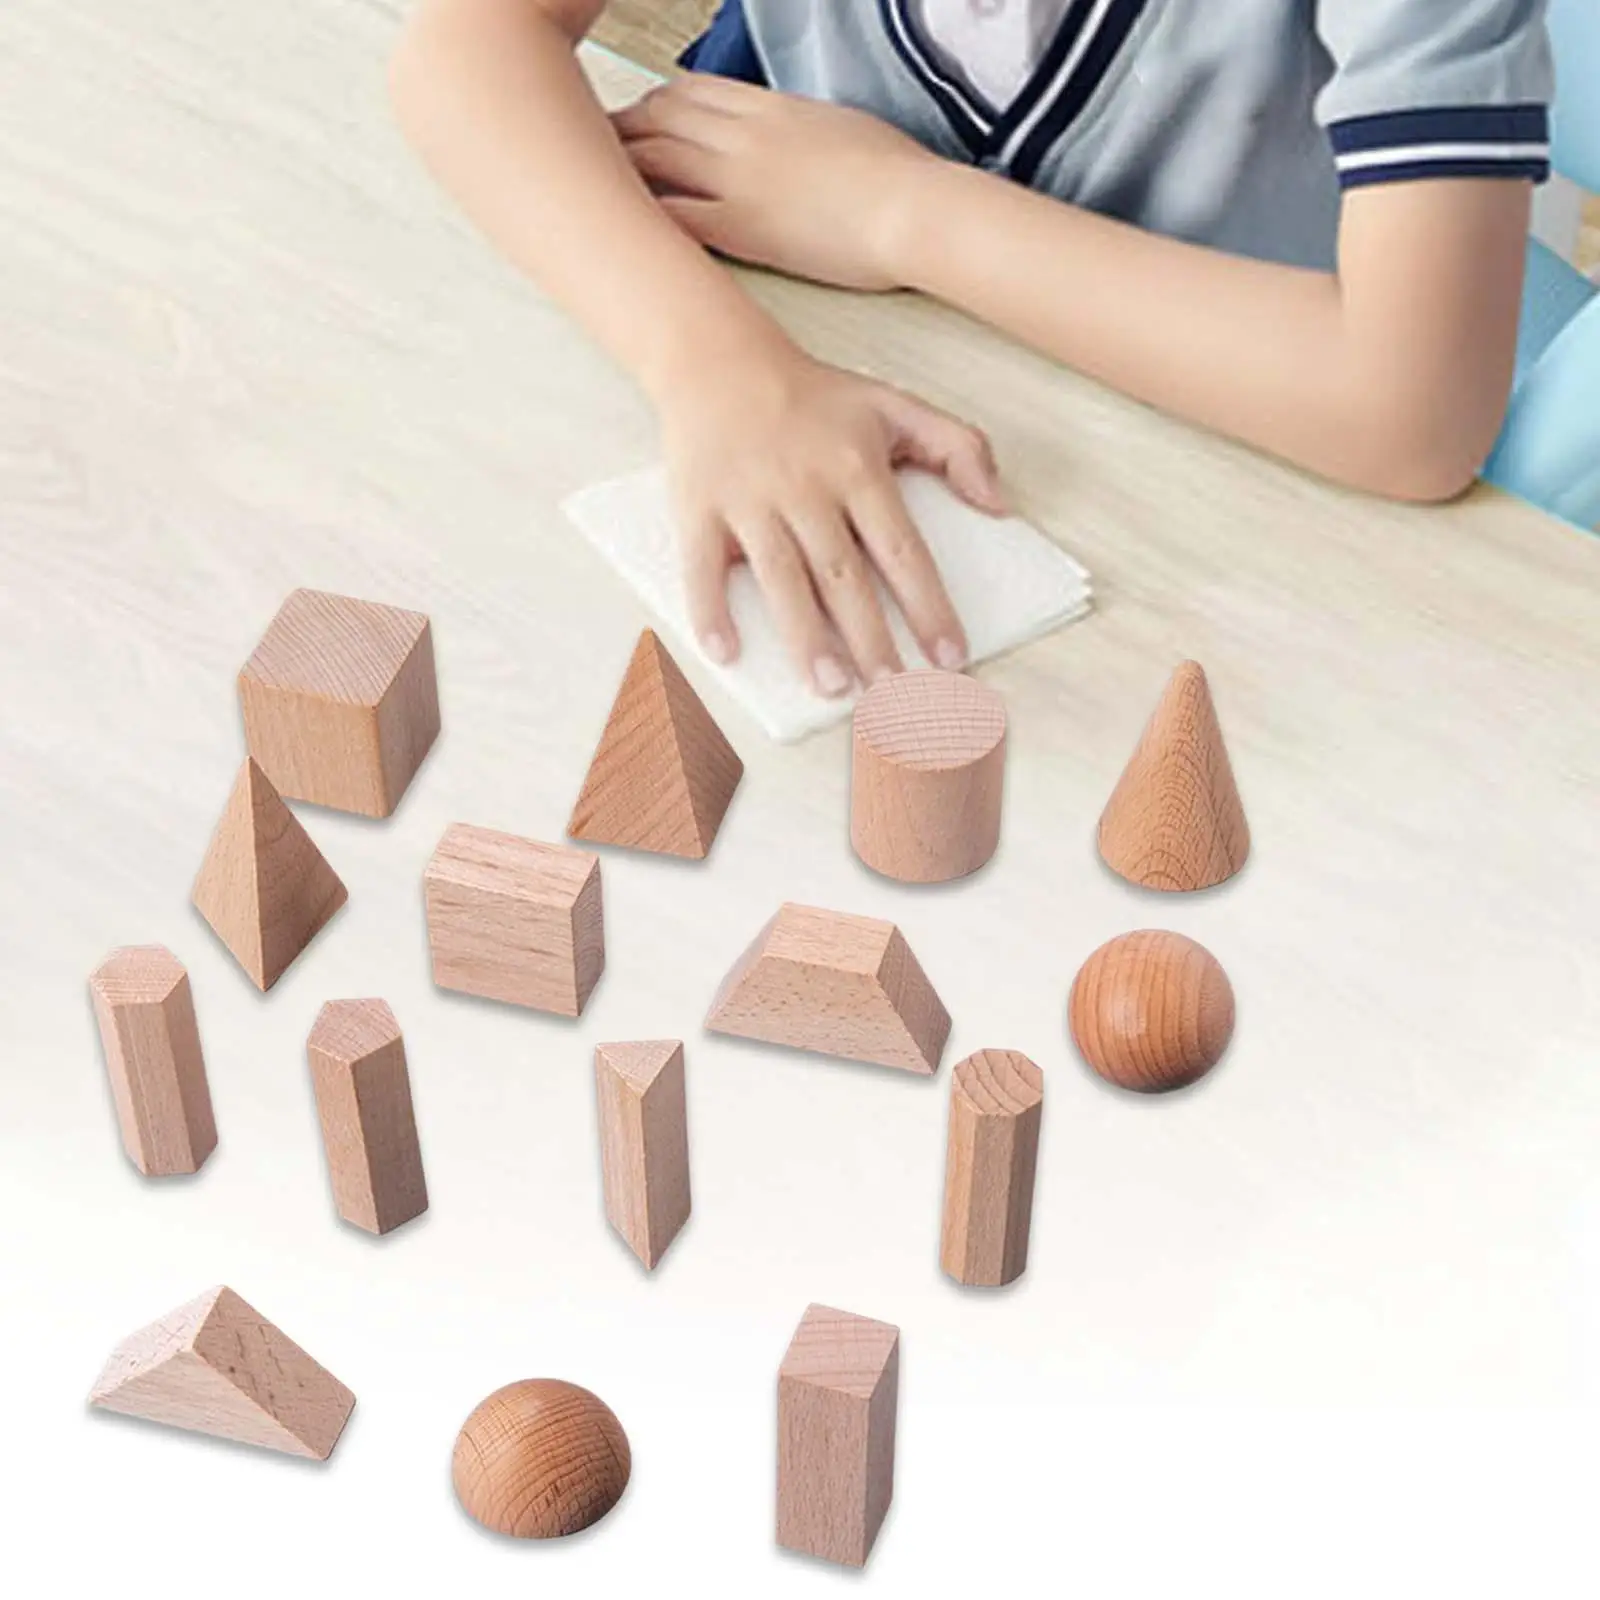 15Pcs Wooden Geometric Solid Blocks Stacking Toy Learning Education Math Toys for Babies